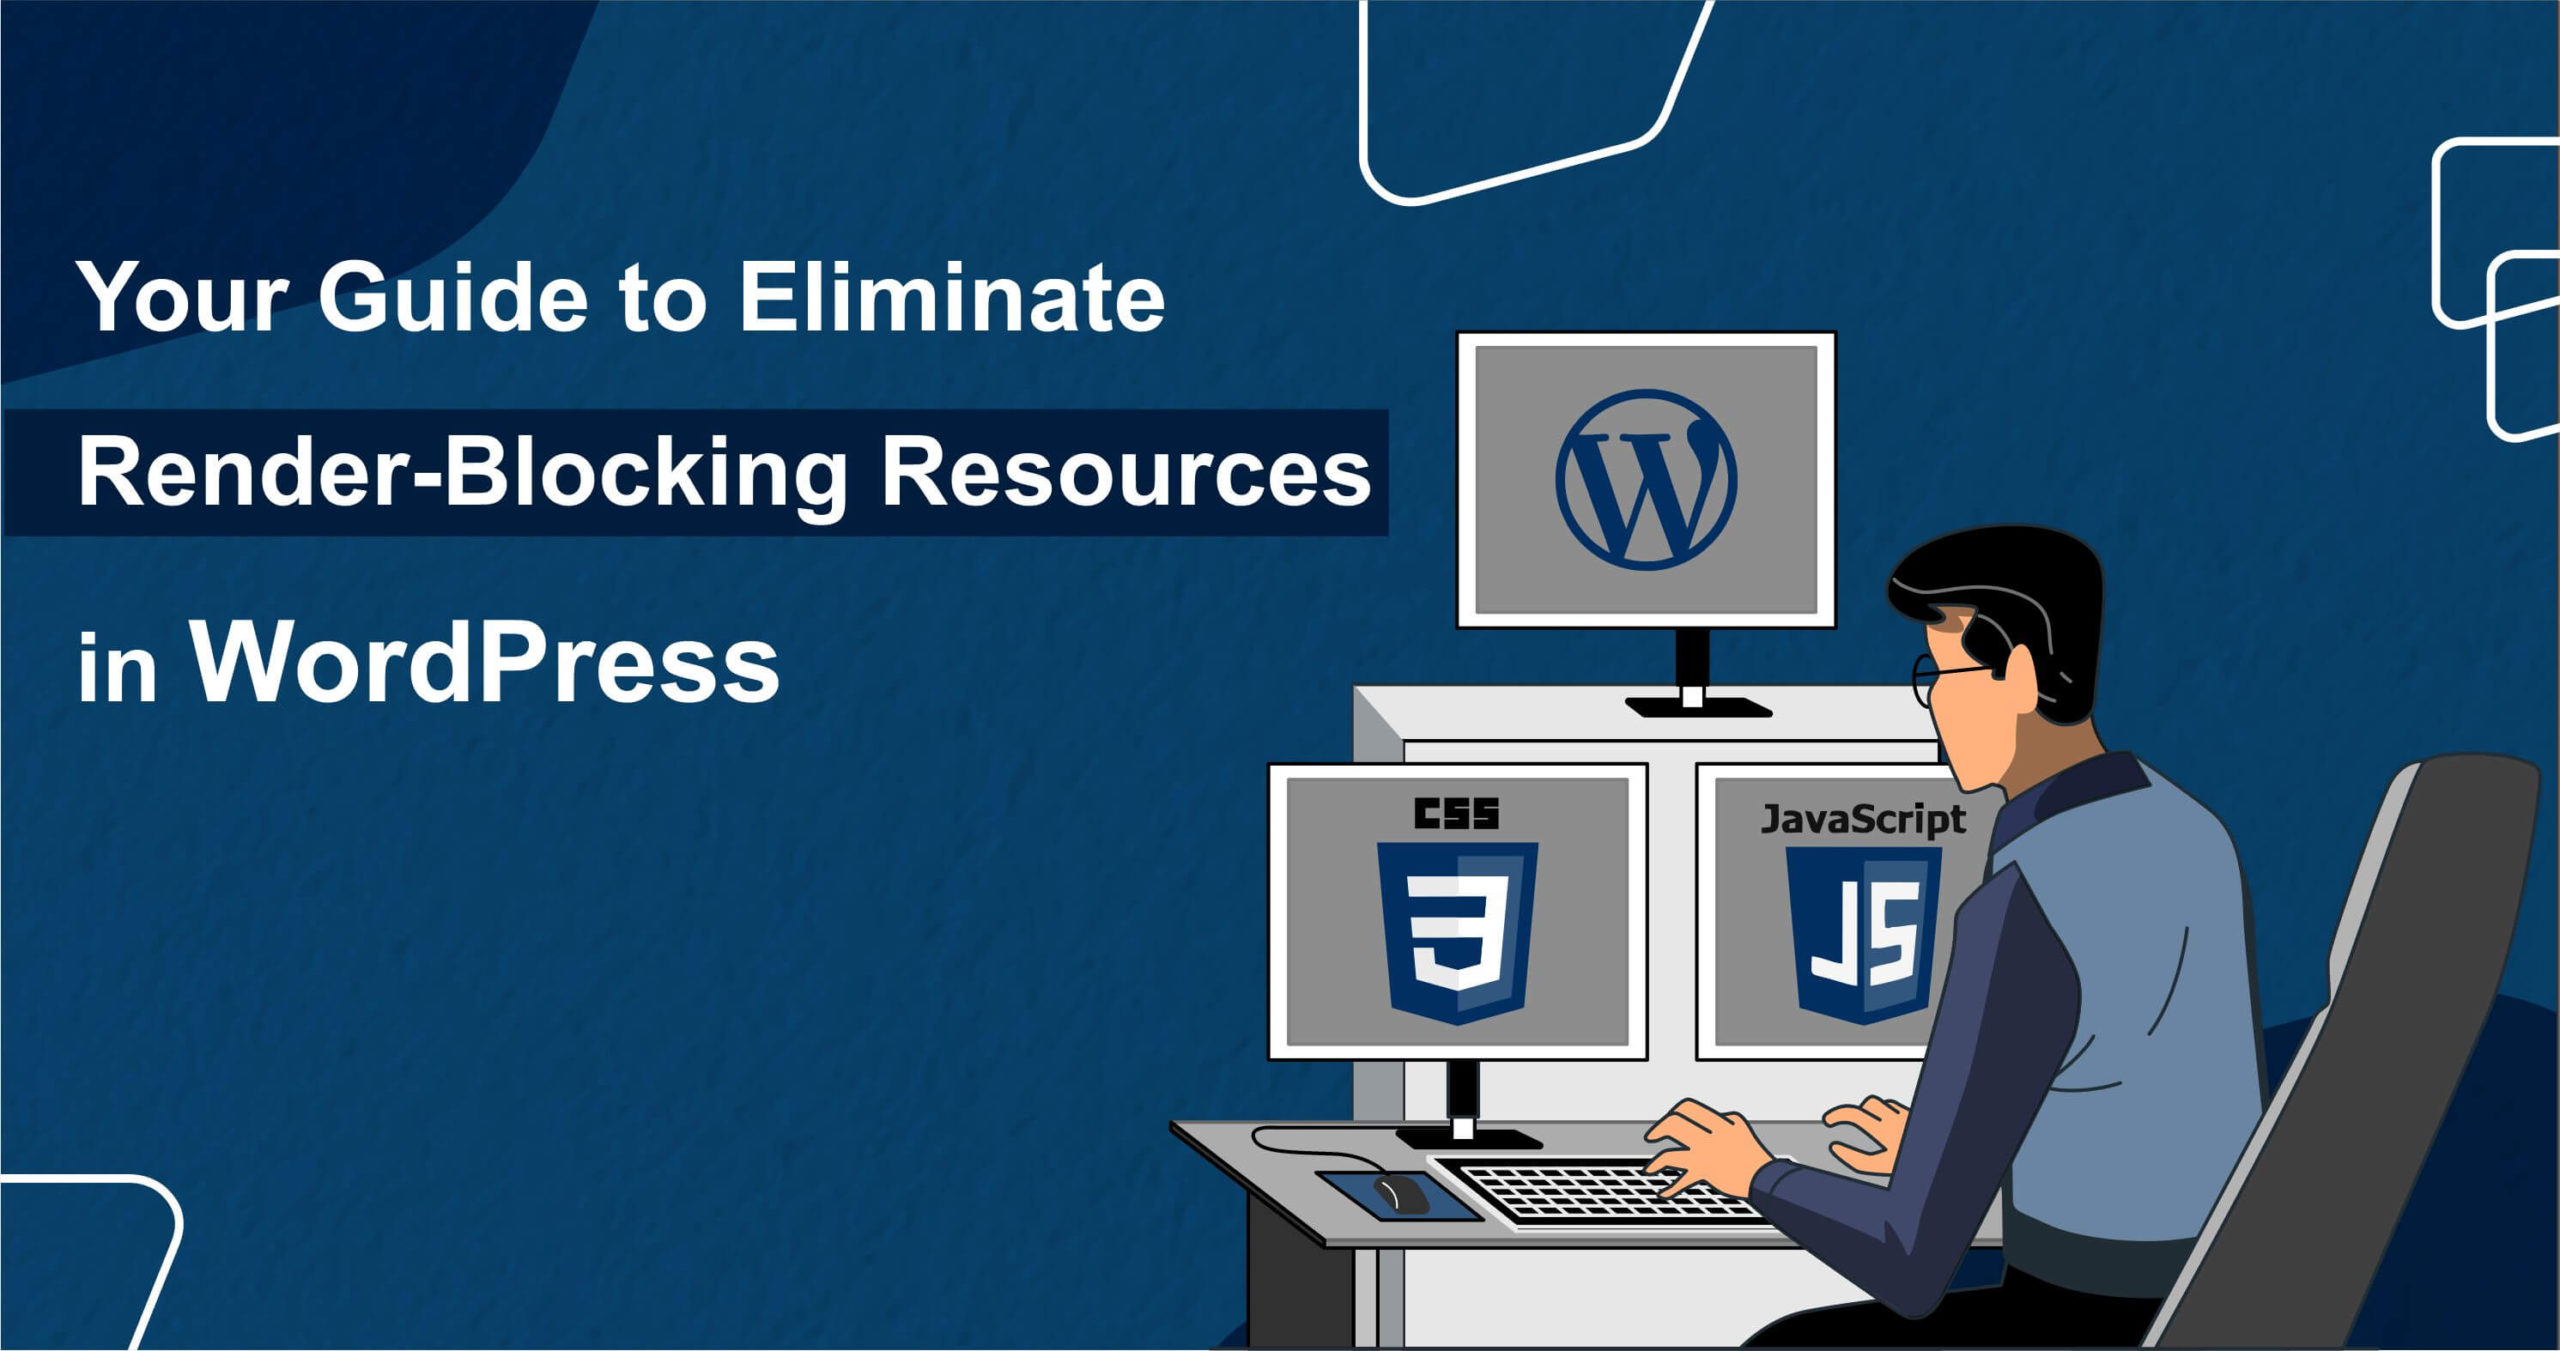 Your Guide to Eliminate Render-Blocking Resources in WordPress